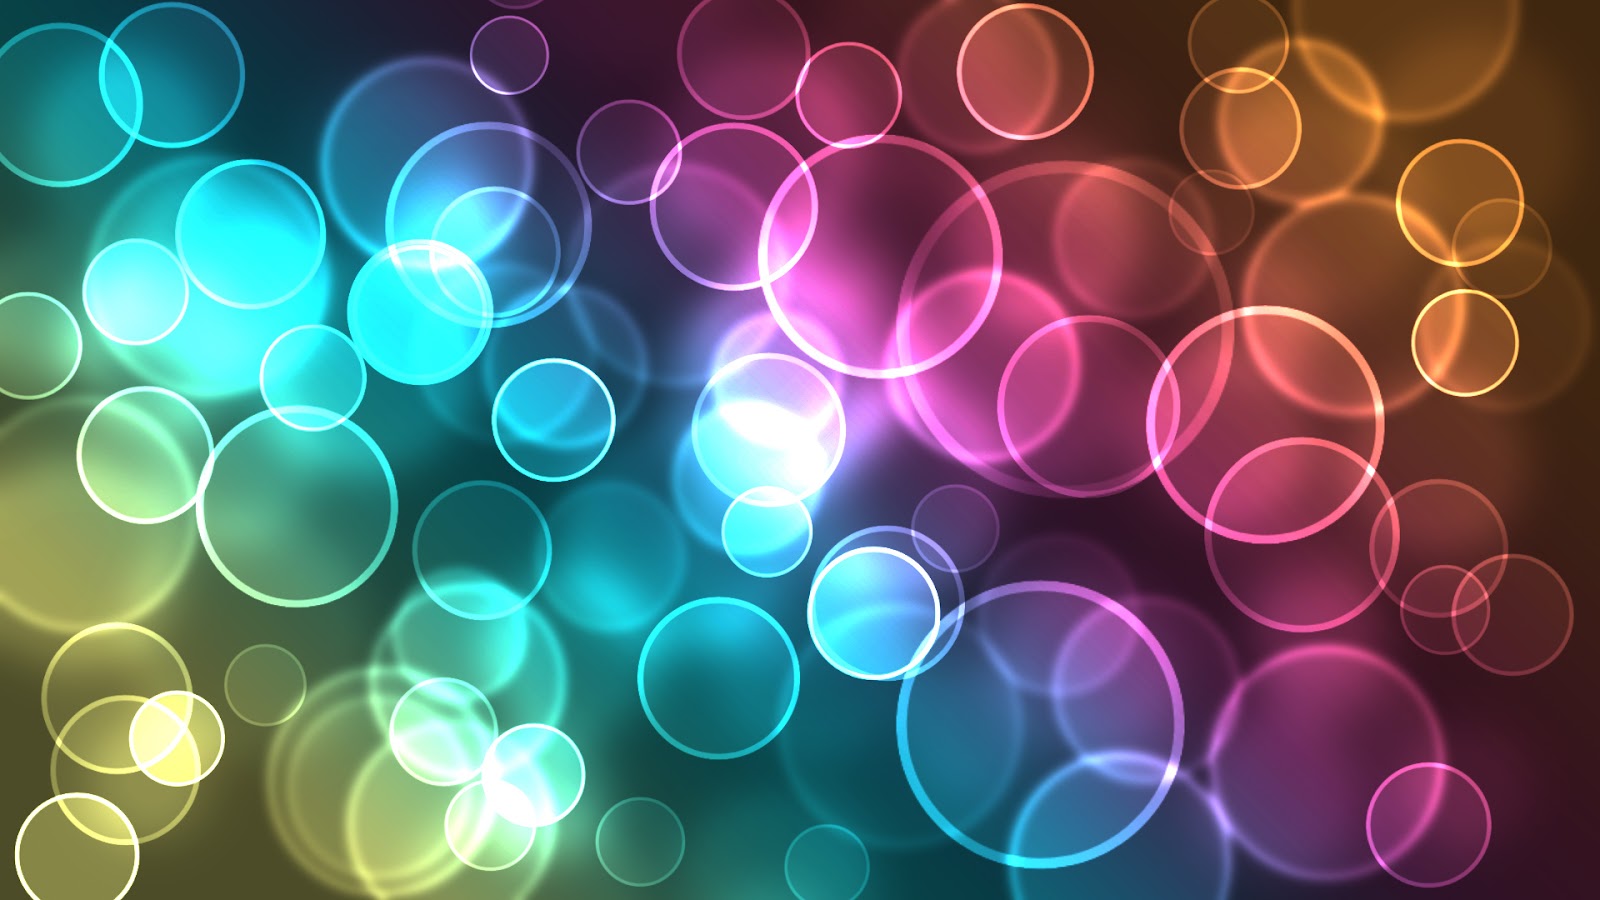 Abstruct wallpaper hd background circel bubbles colorfuljpg